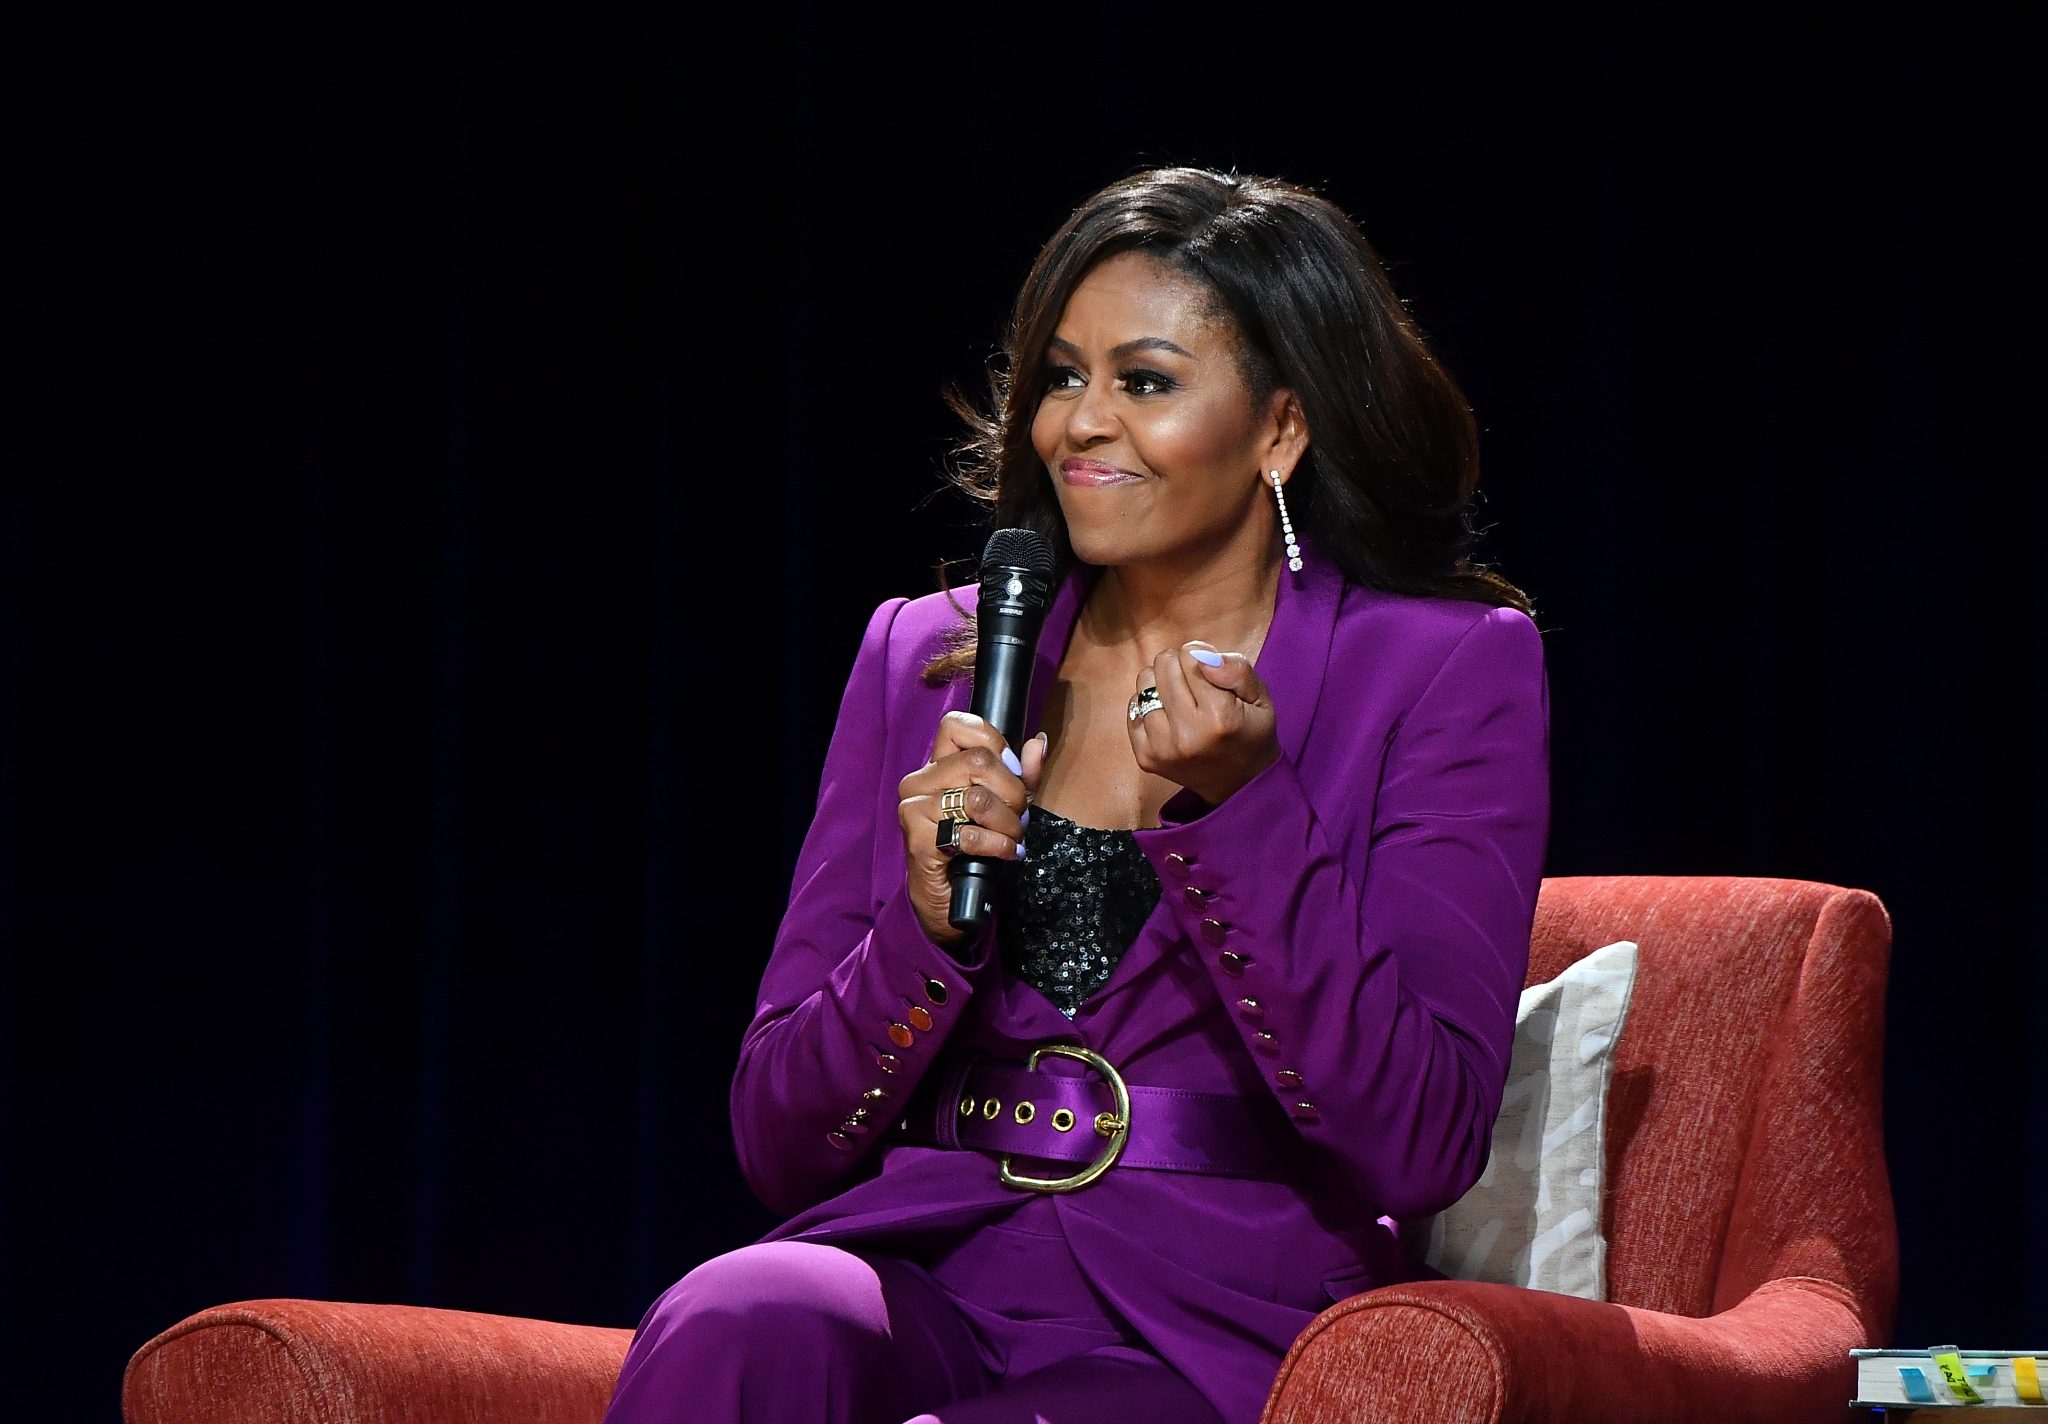 Michelle Obama is releasing her second book next month